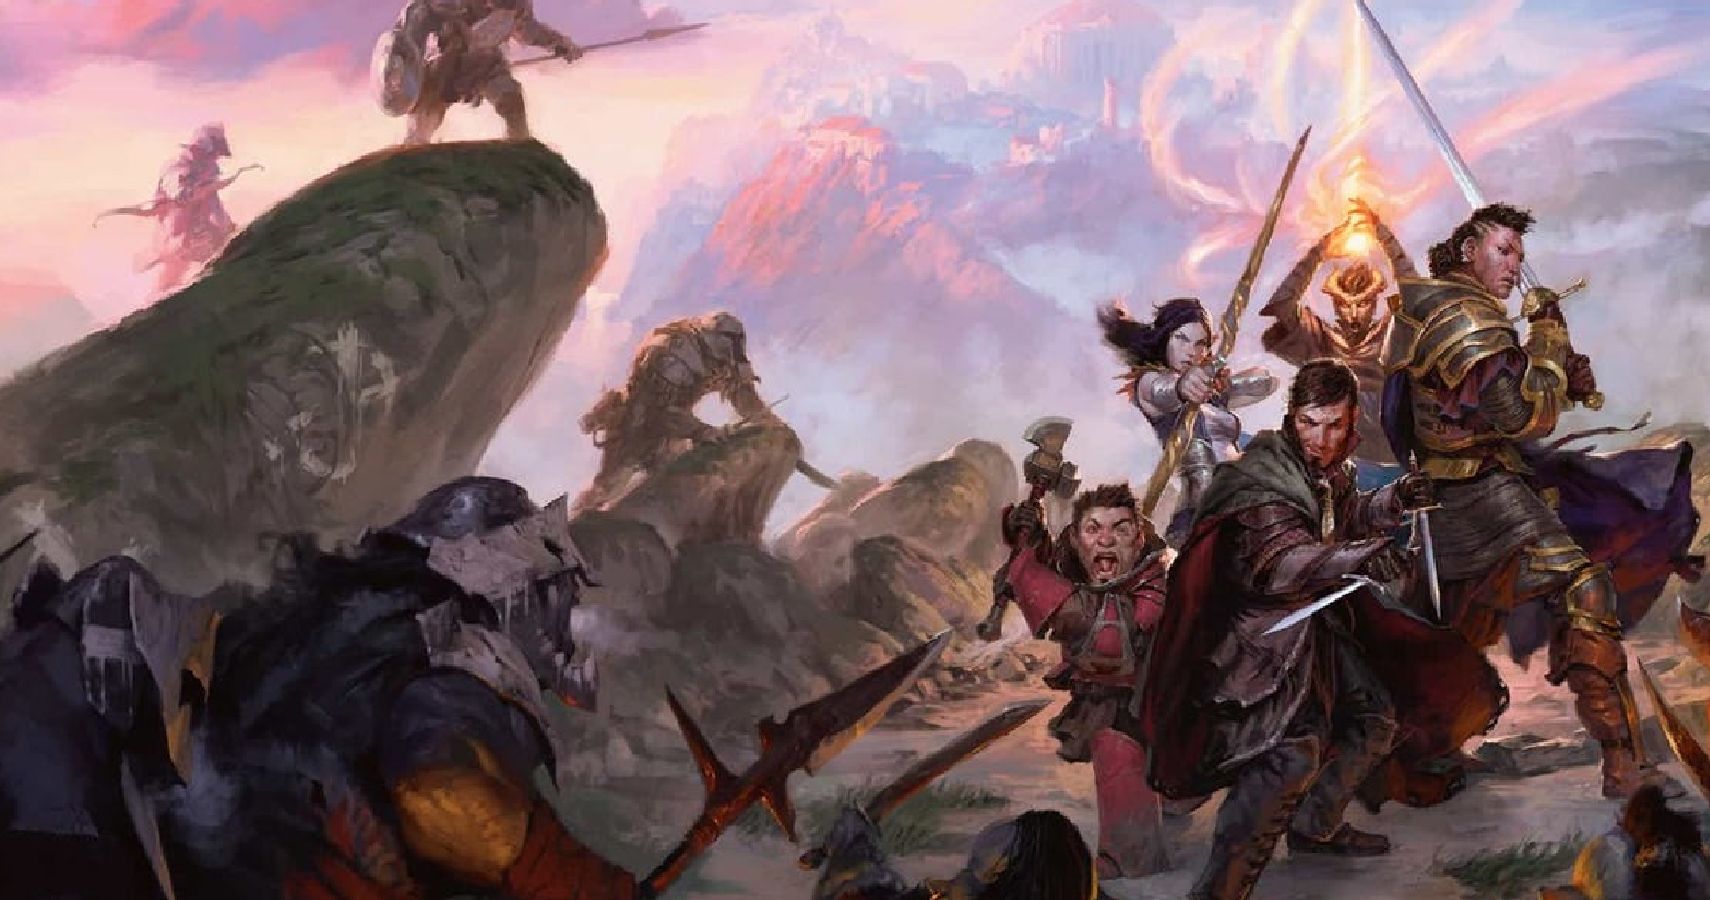 30 Rare Dungeons Dragons Weapons That Are Impossible To Find (And Where To Find Them)